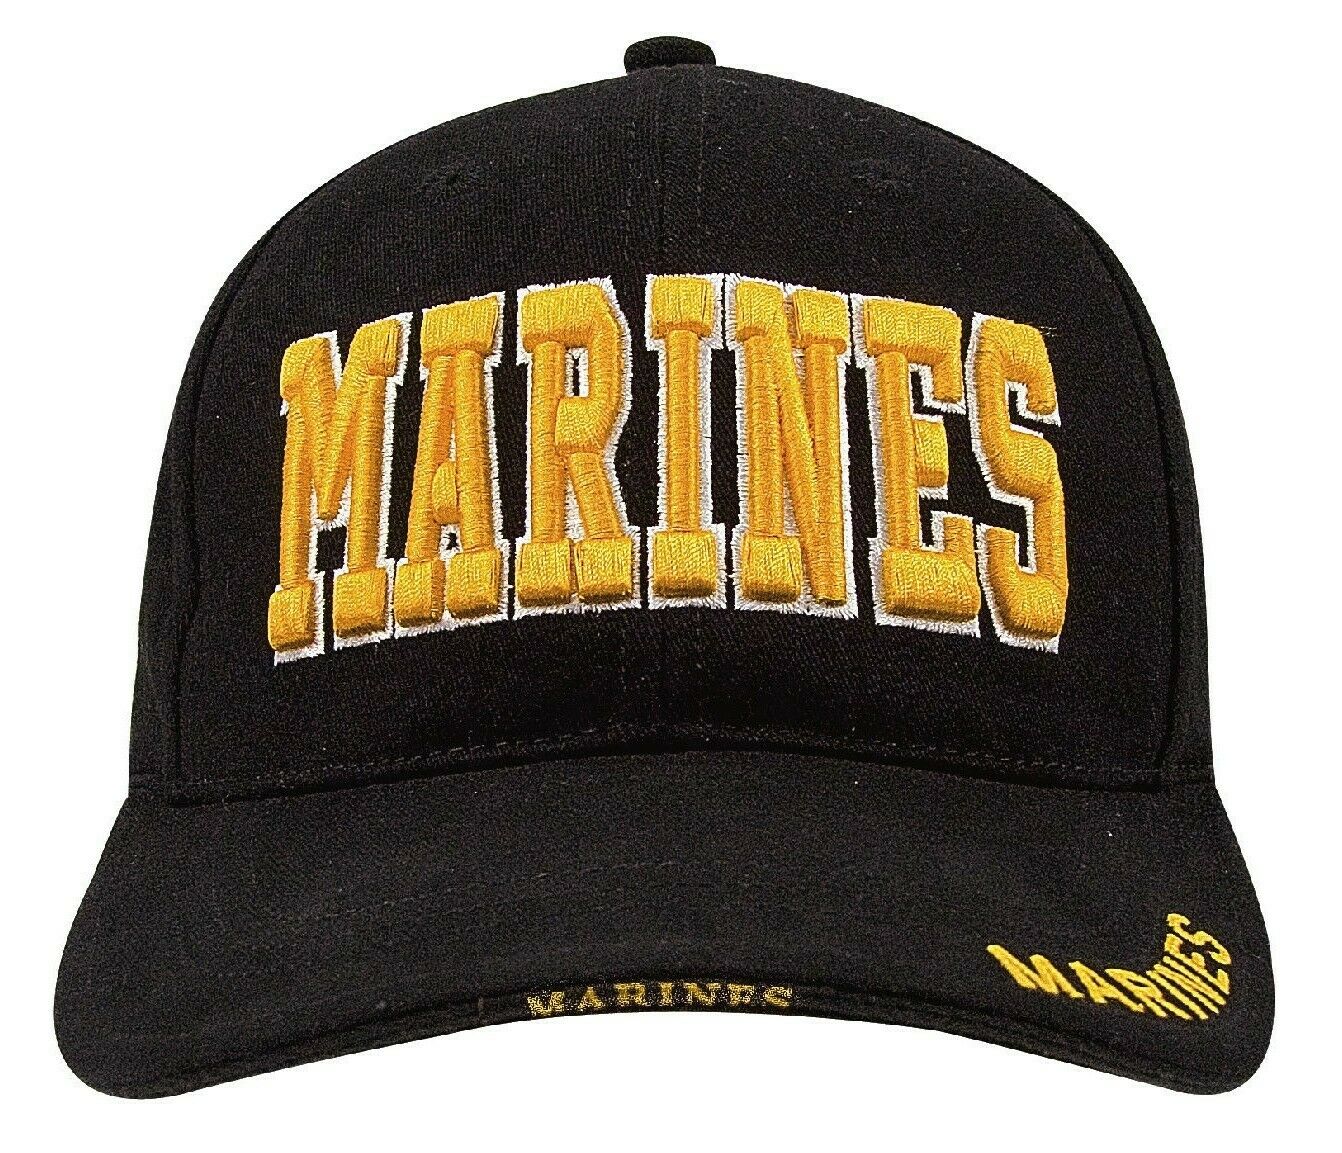 Rothco Deluxe Marines Low Profile Insignia Cap - Black